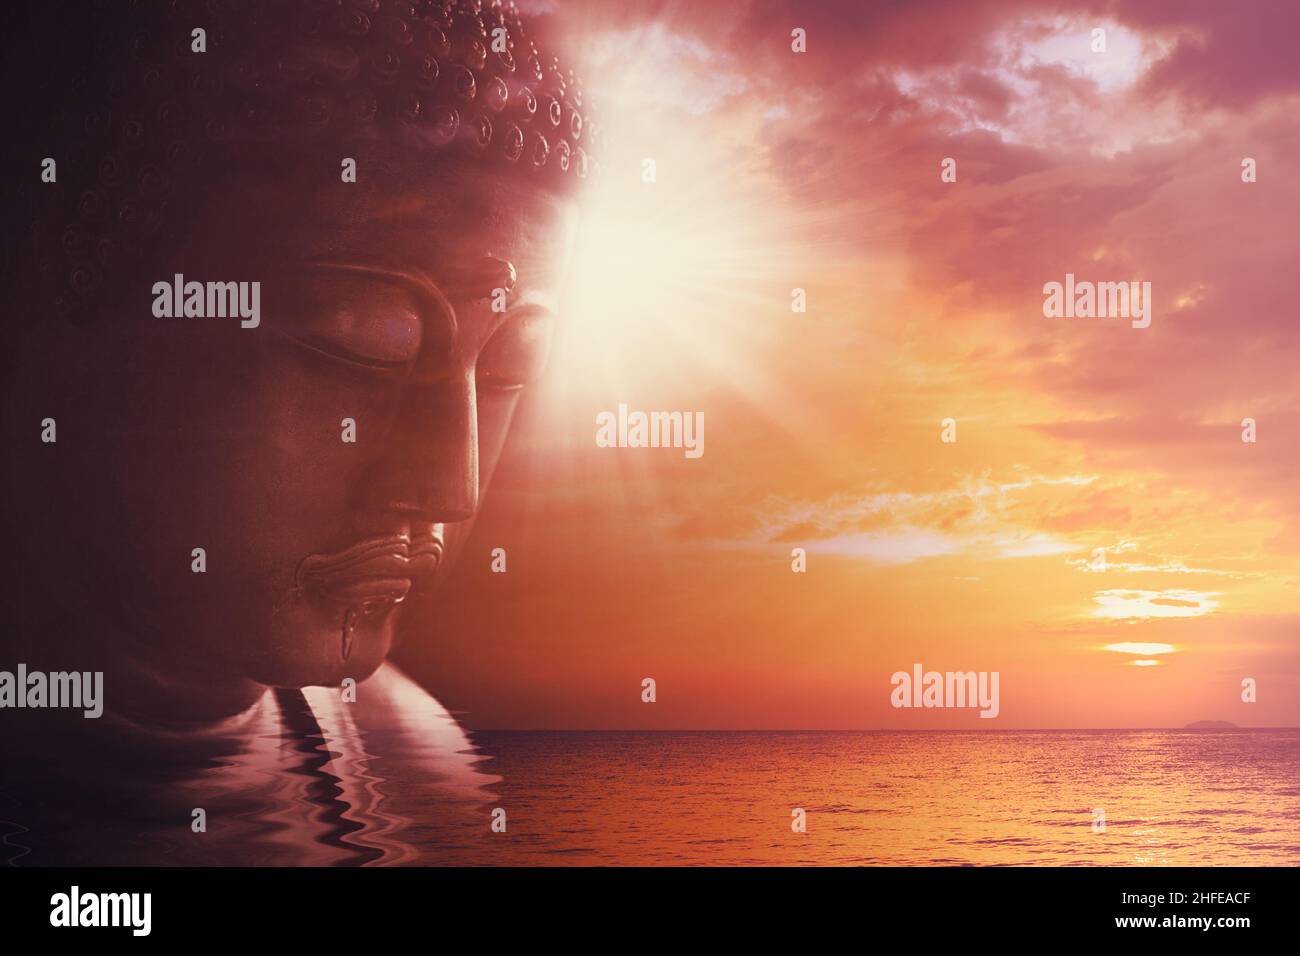 Asian Buddha face sign of peace quiet calm with sunset sea for meditation peaceful background Stock Photo